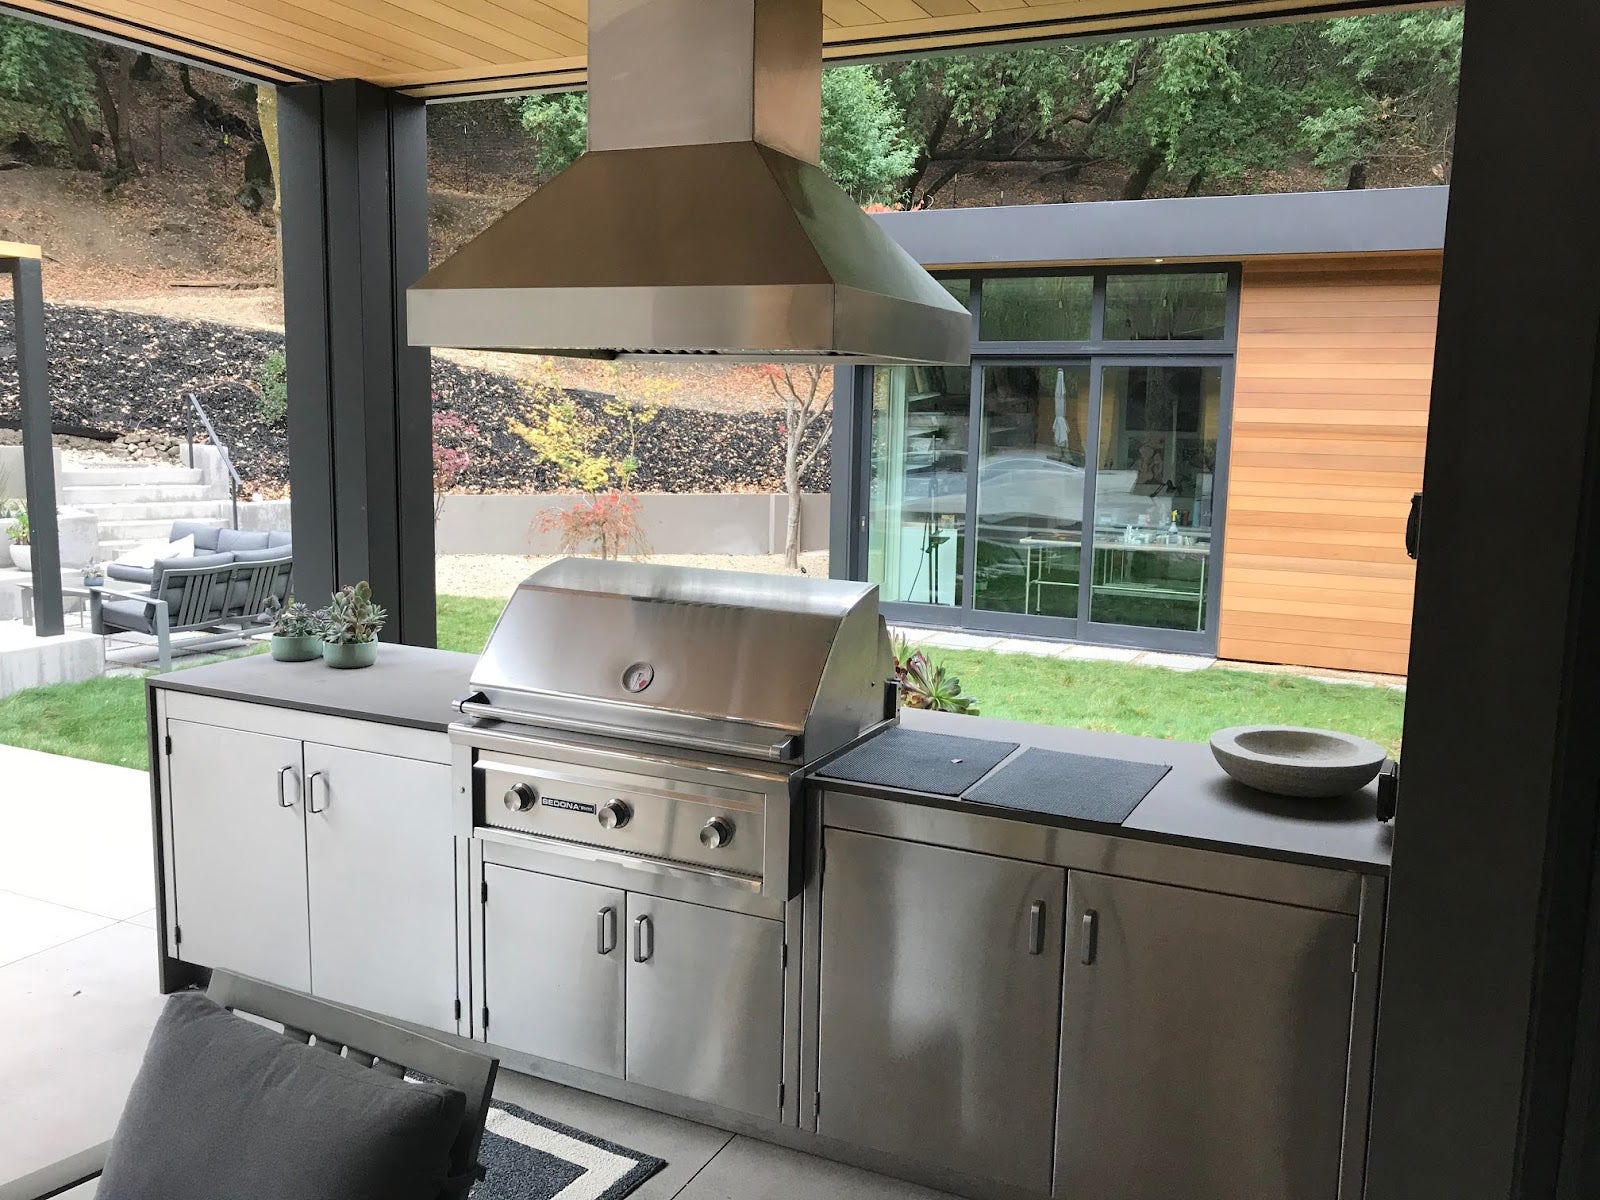 Sleek patio cooking space with a professional grill setup, overlooking a contemporary outdoor seating area and landscaped garden. - Proline Range Hoods - prolinerangehoods.com 